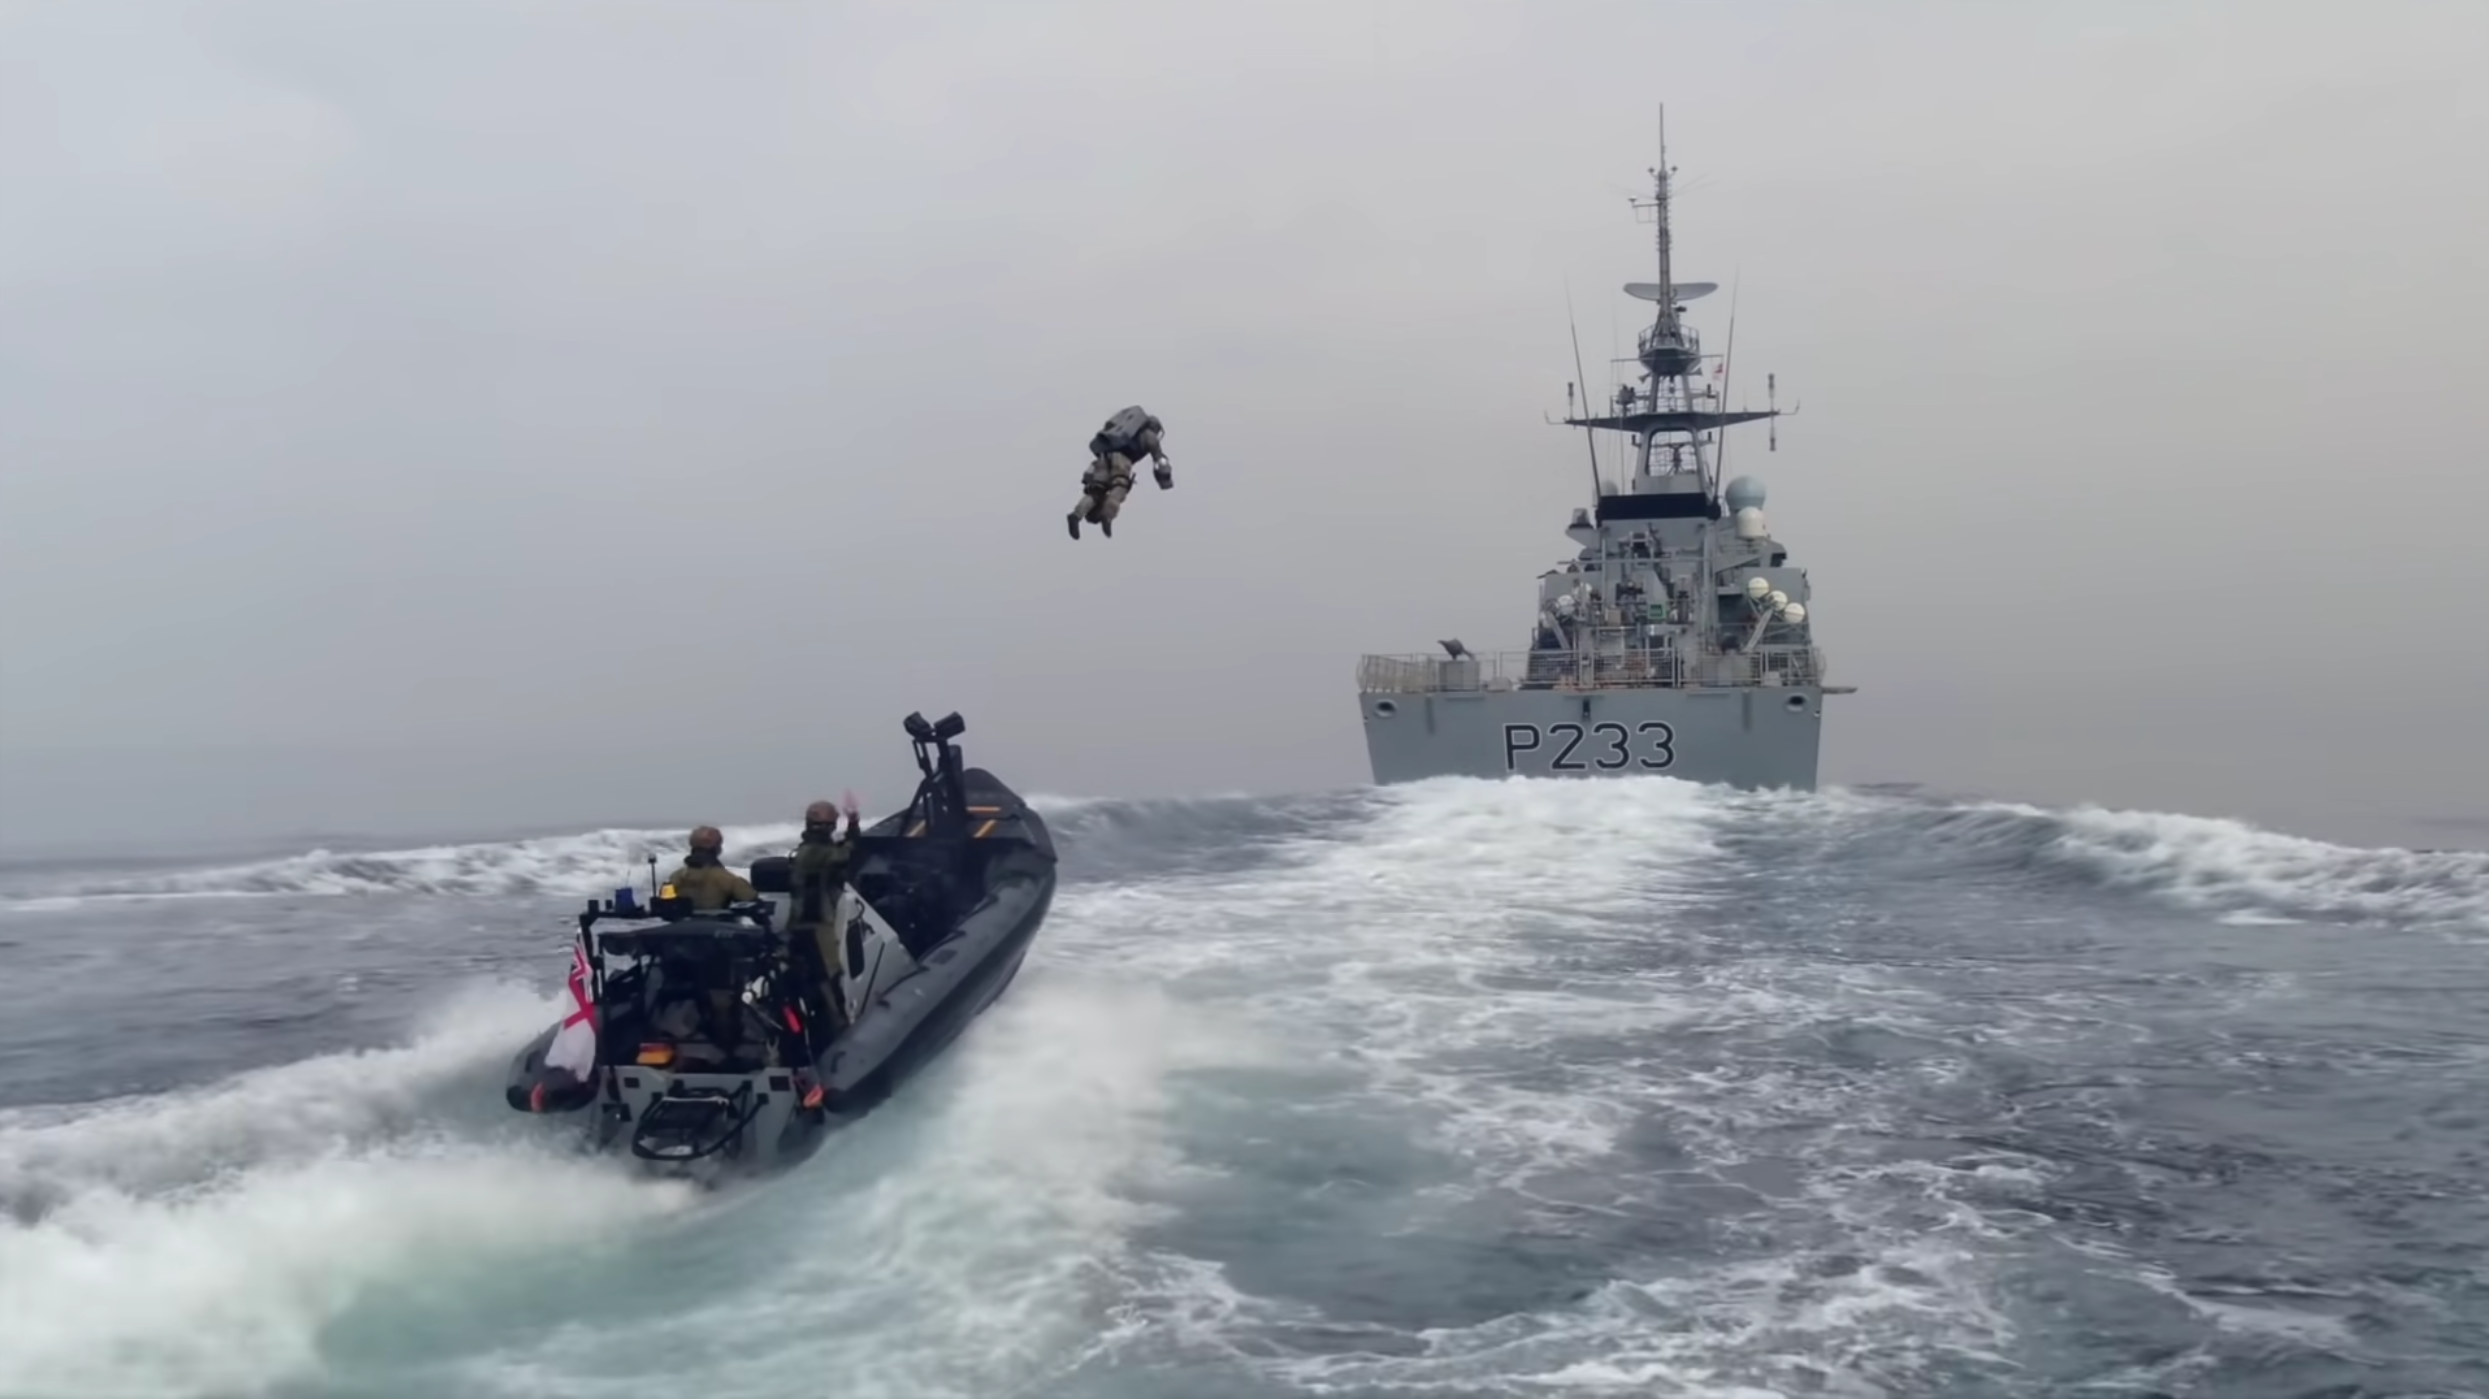 Watch a Marine Zoom From One Boat to Another  With a Jetpack